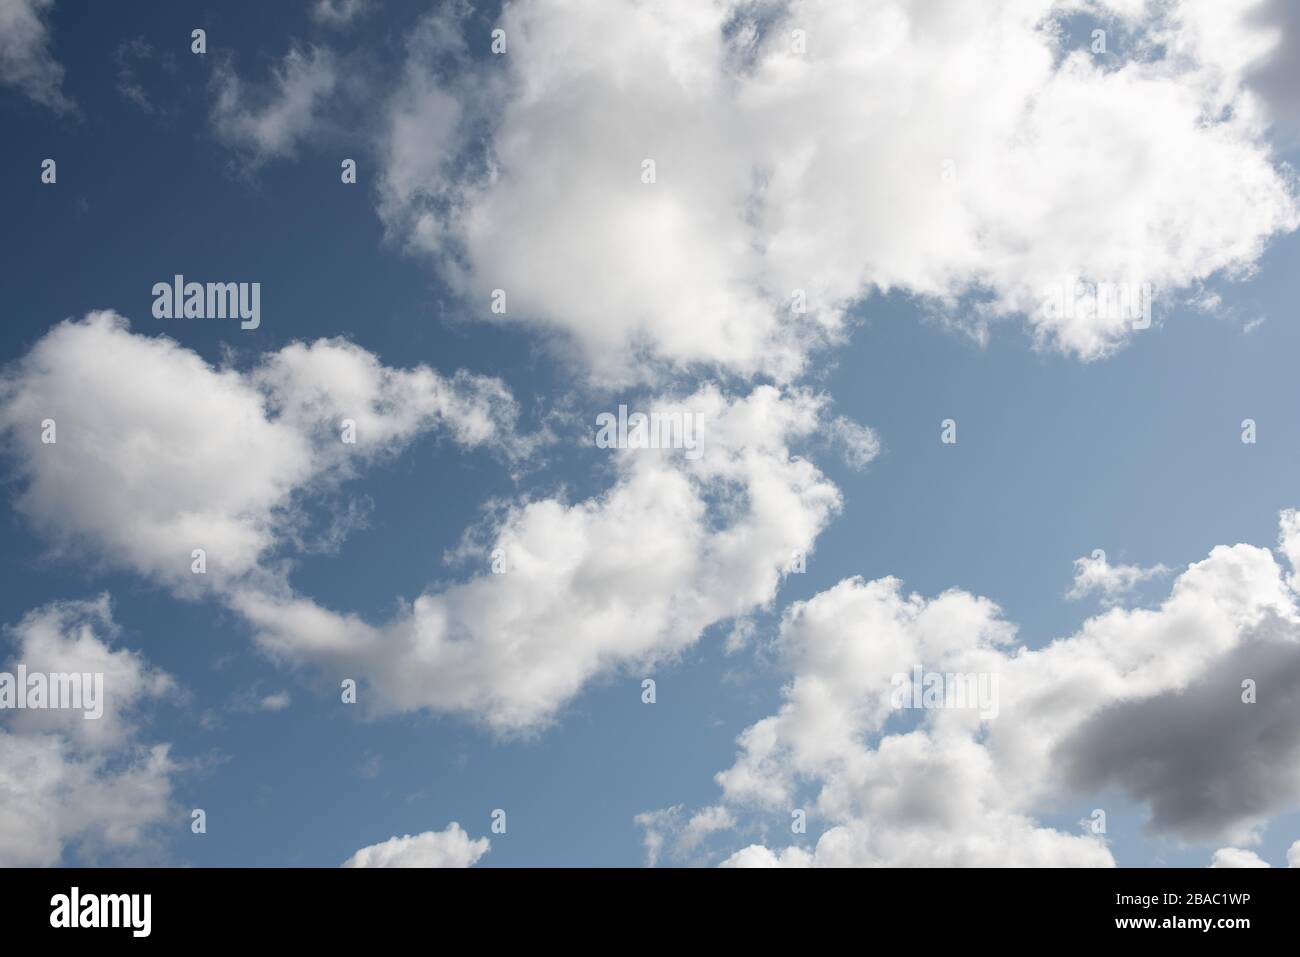 Weather forecast partly cloudy storm clouds stock photo blue skies with sunshine Stock Photo